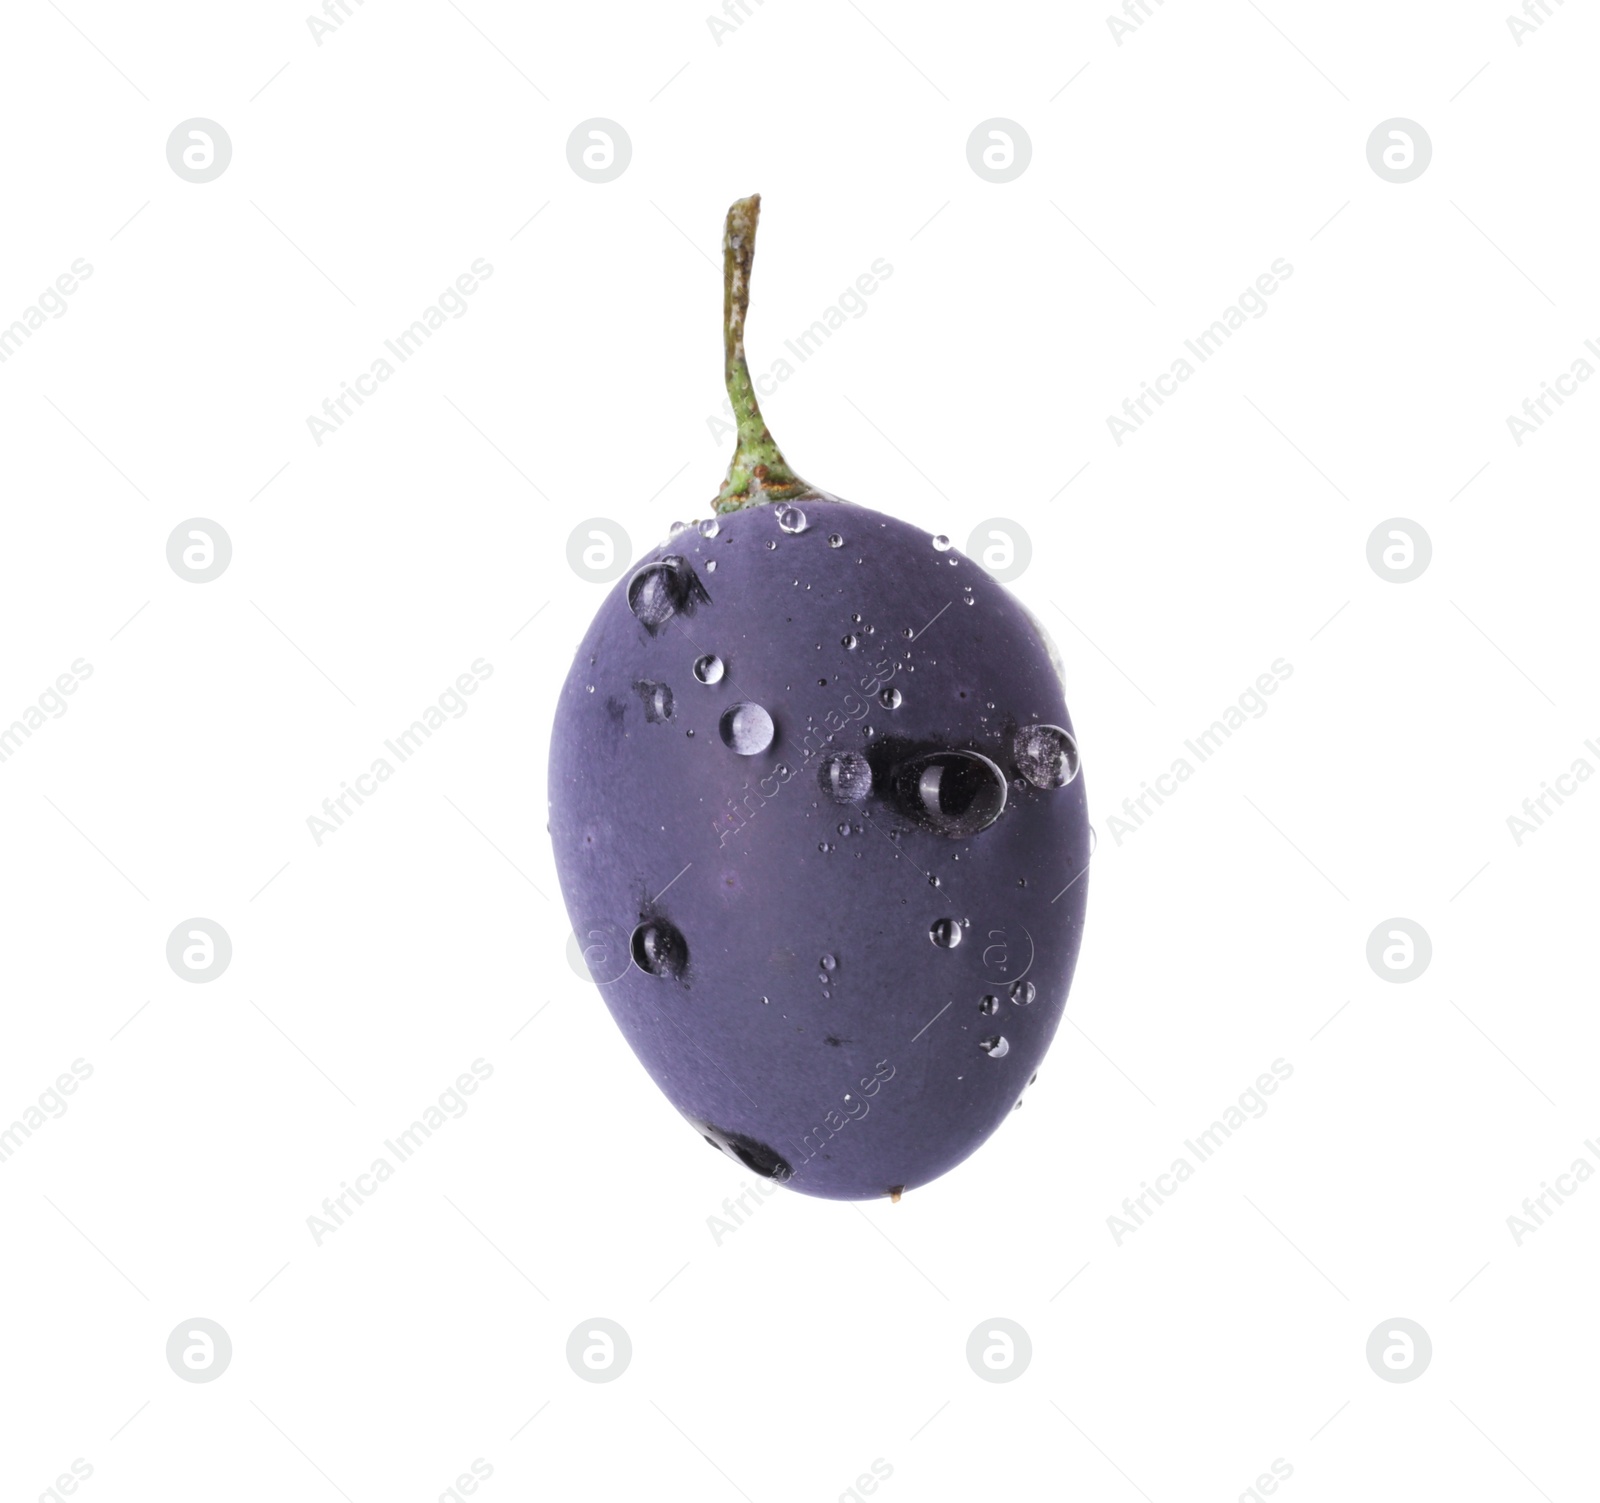 Photo of One ripe dark blue grape with water drops isolated on white